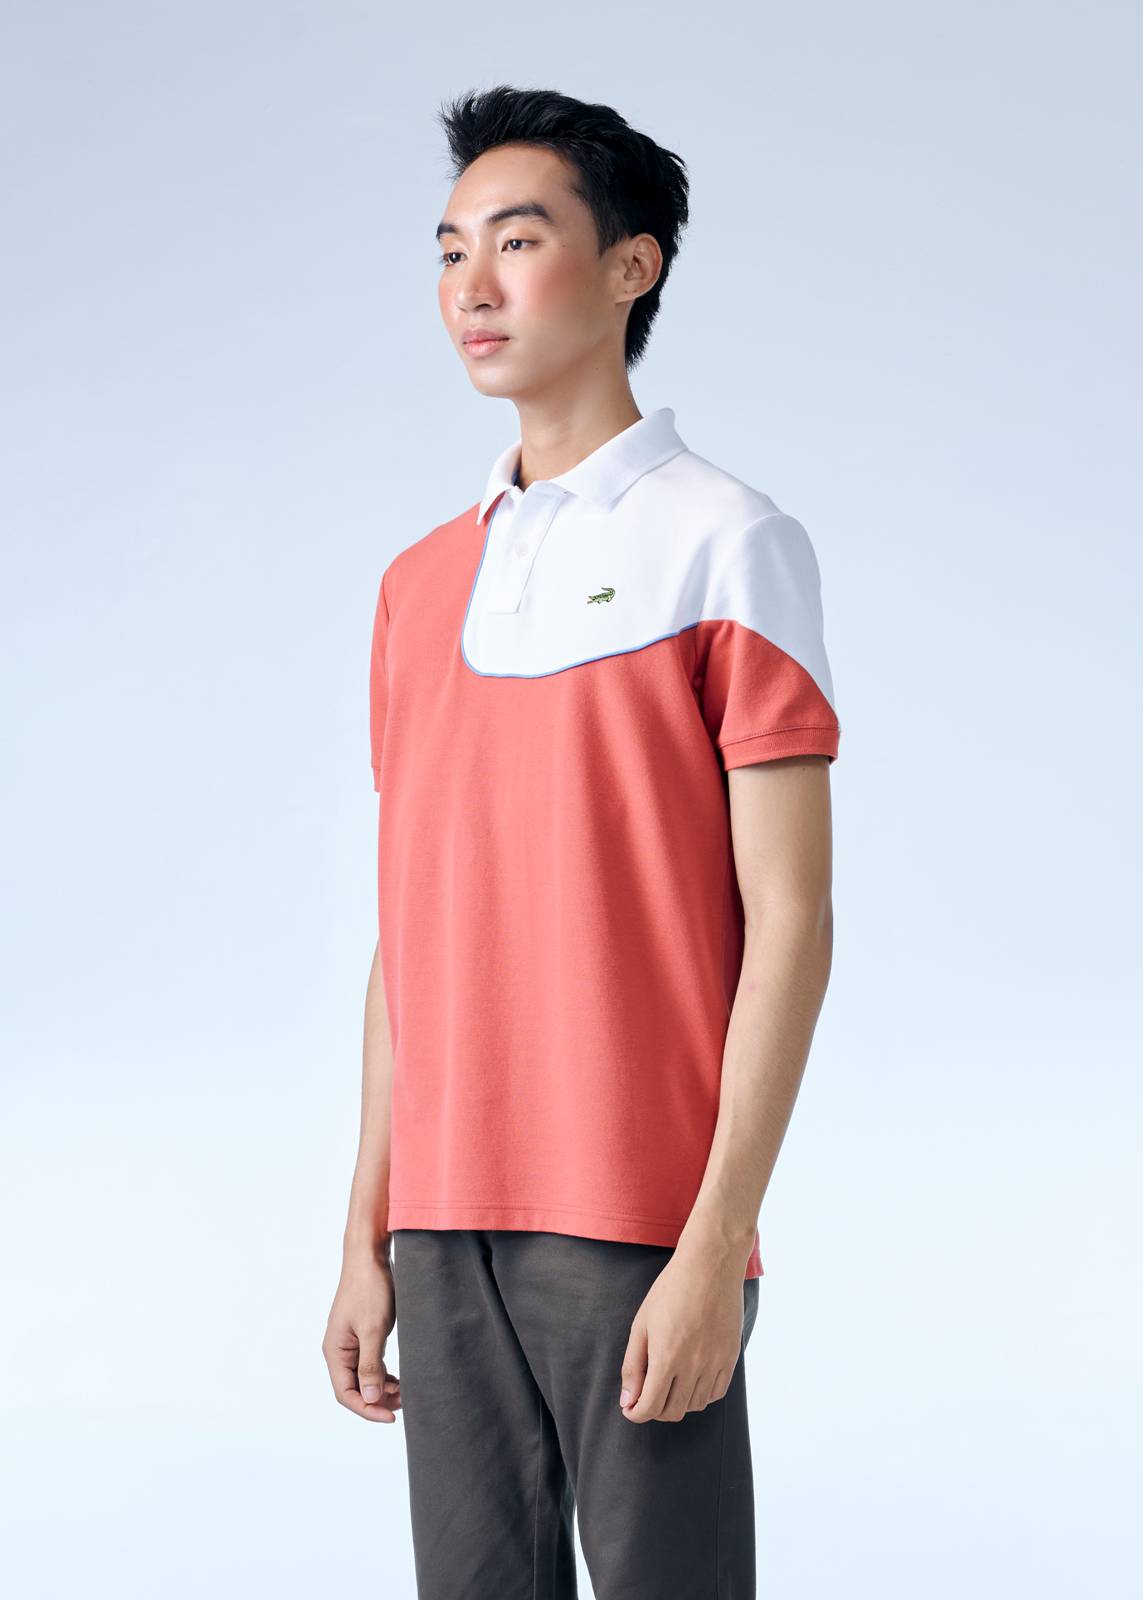 ASTRO DUST RED CUSTOM FIT COLOUR BLOCK POLO SHIRT